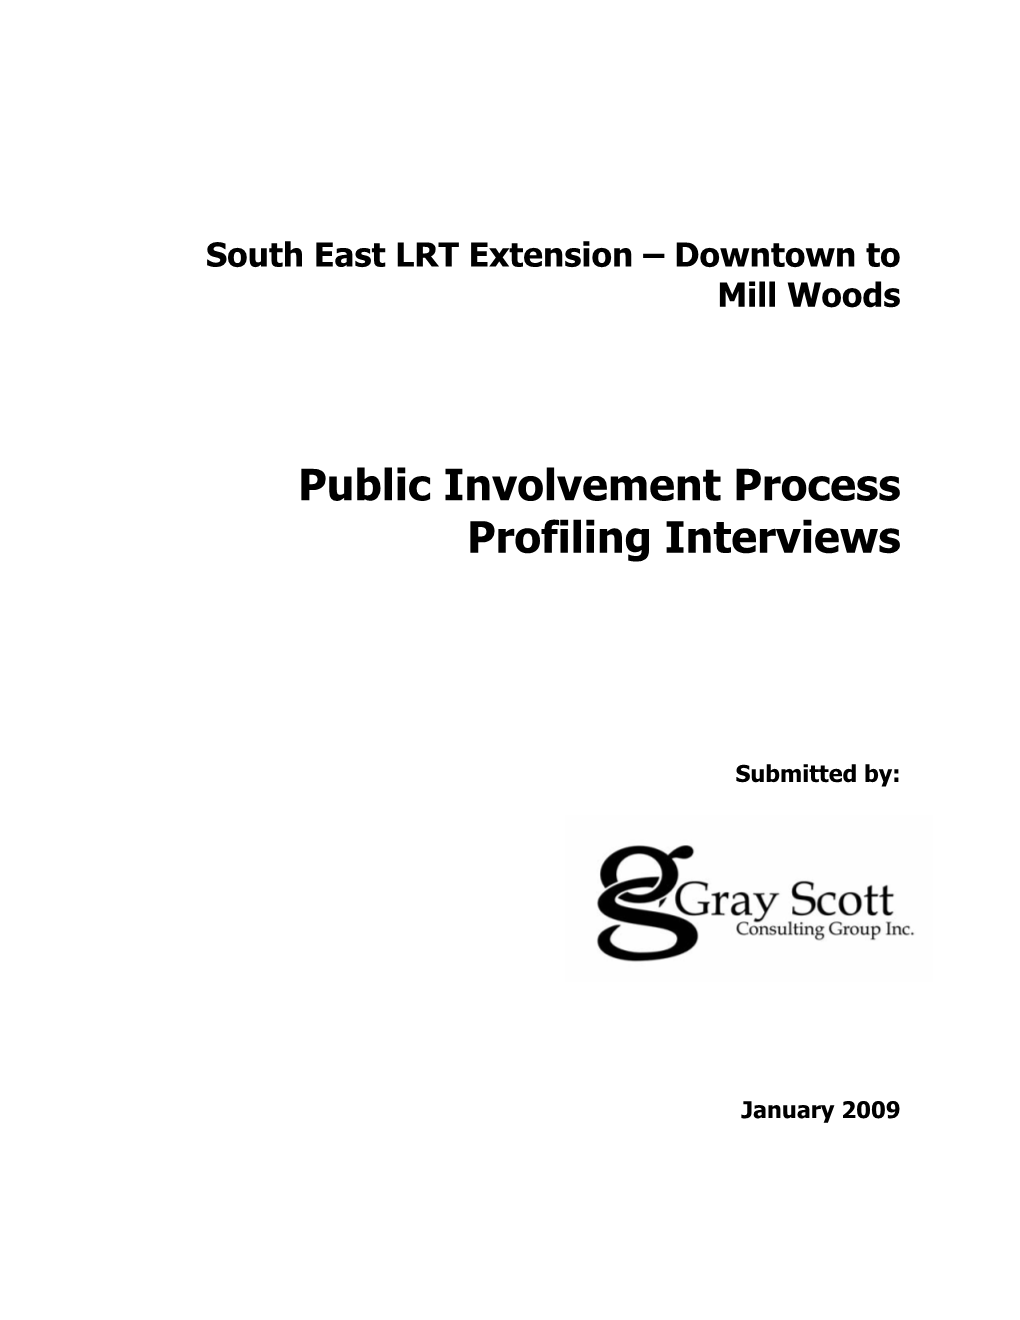 South East LRT Extension – Downtown to Mill Woods